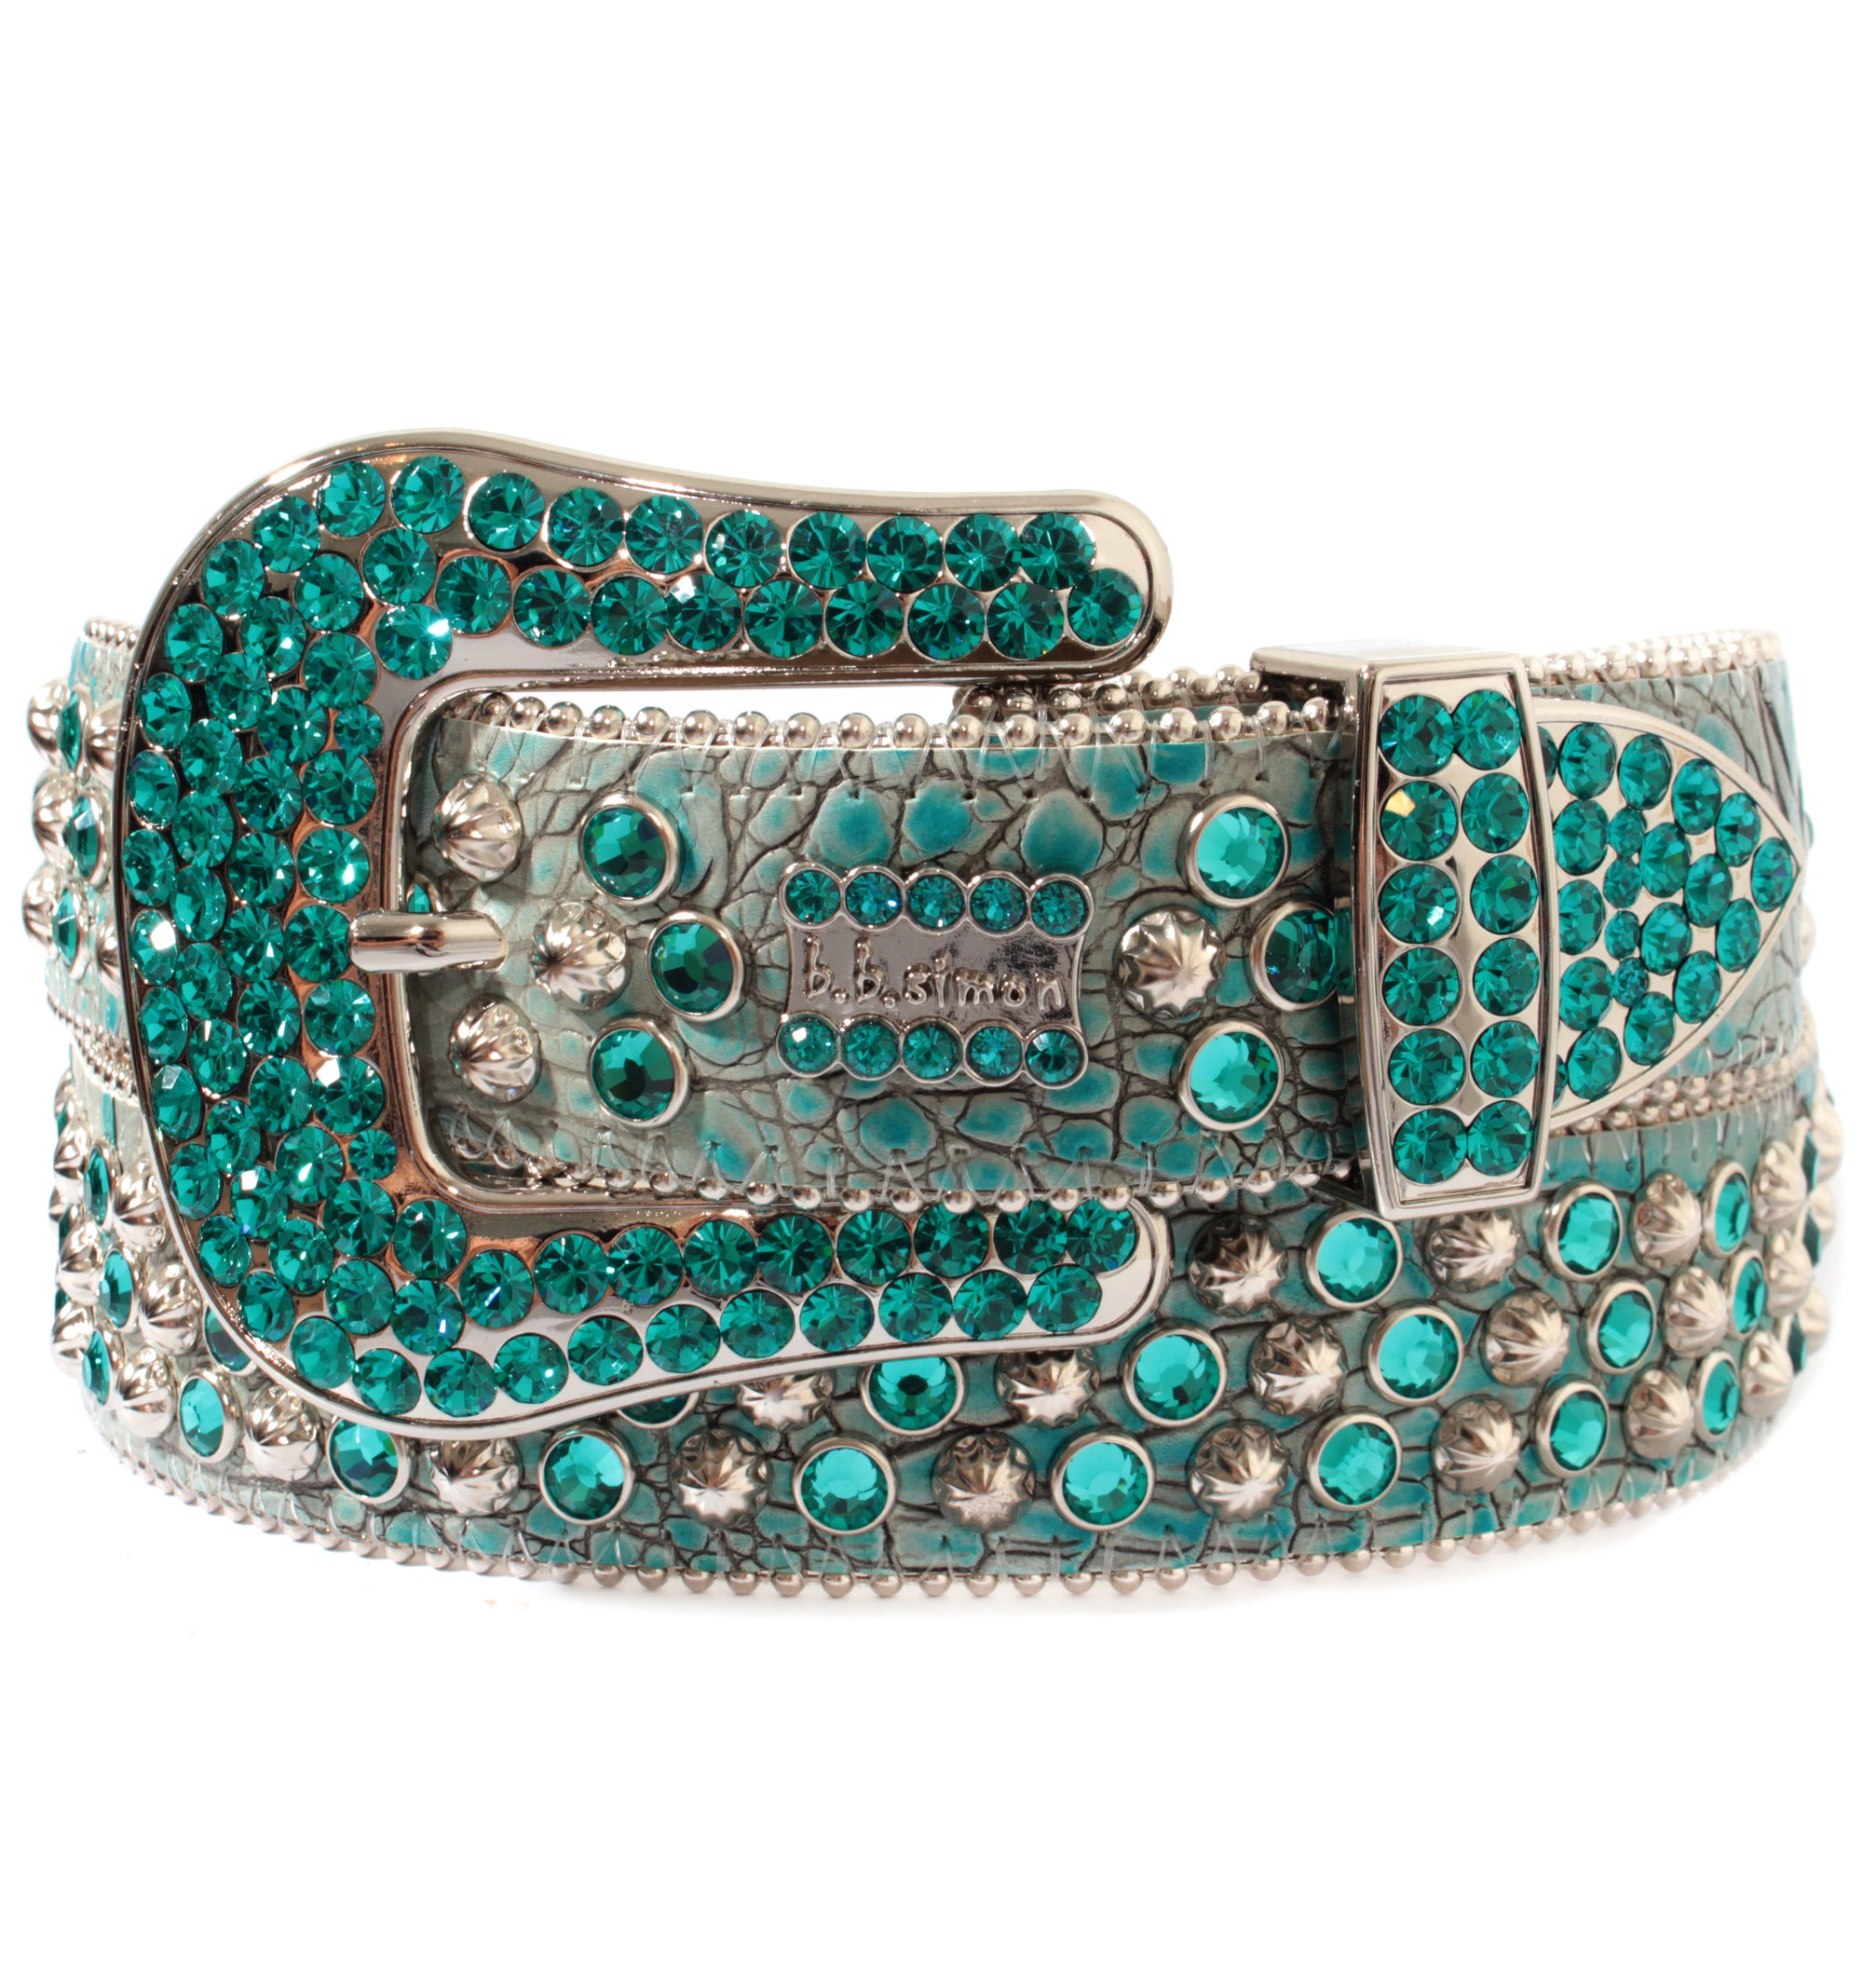 Turquoise belt with silver parachutes